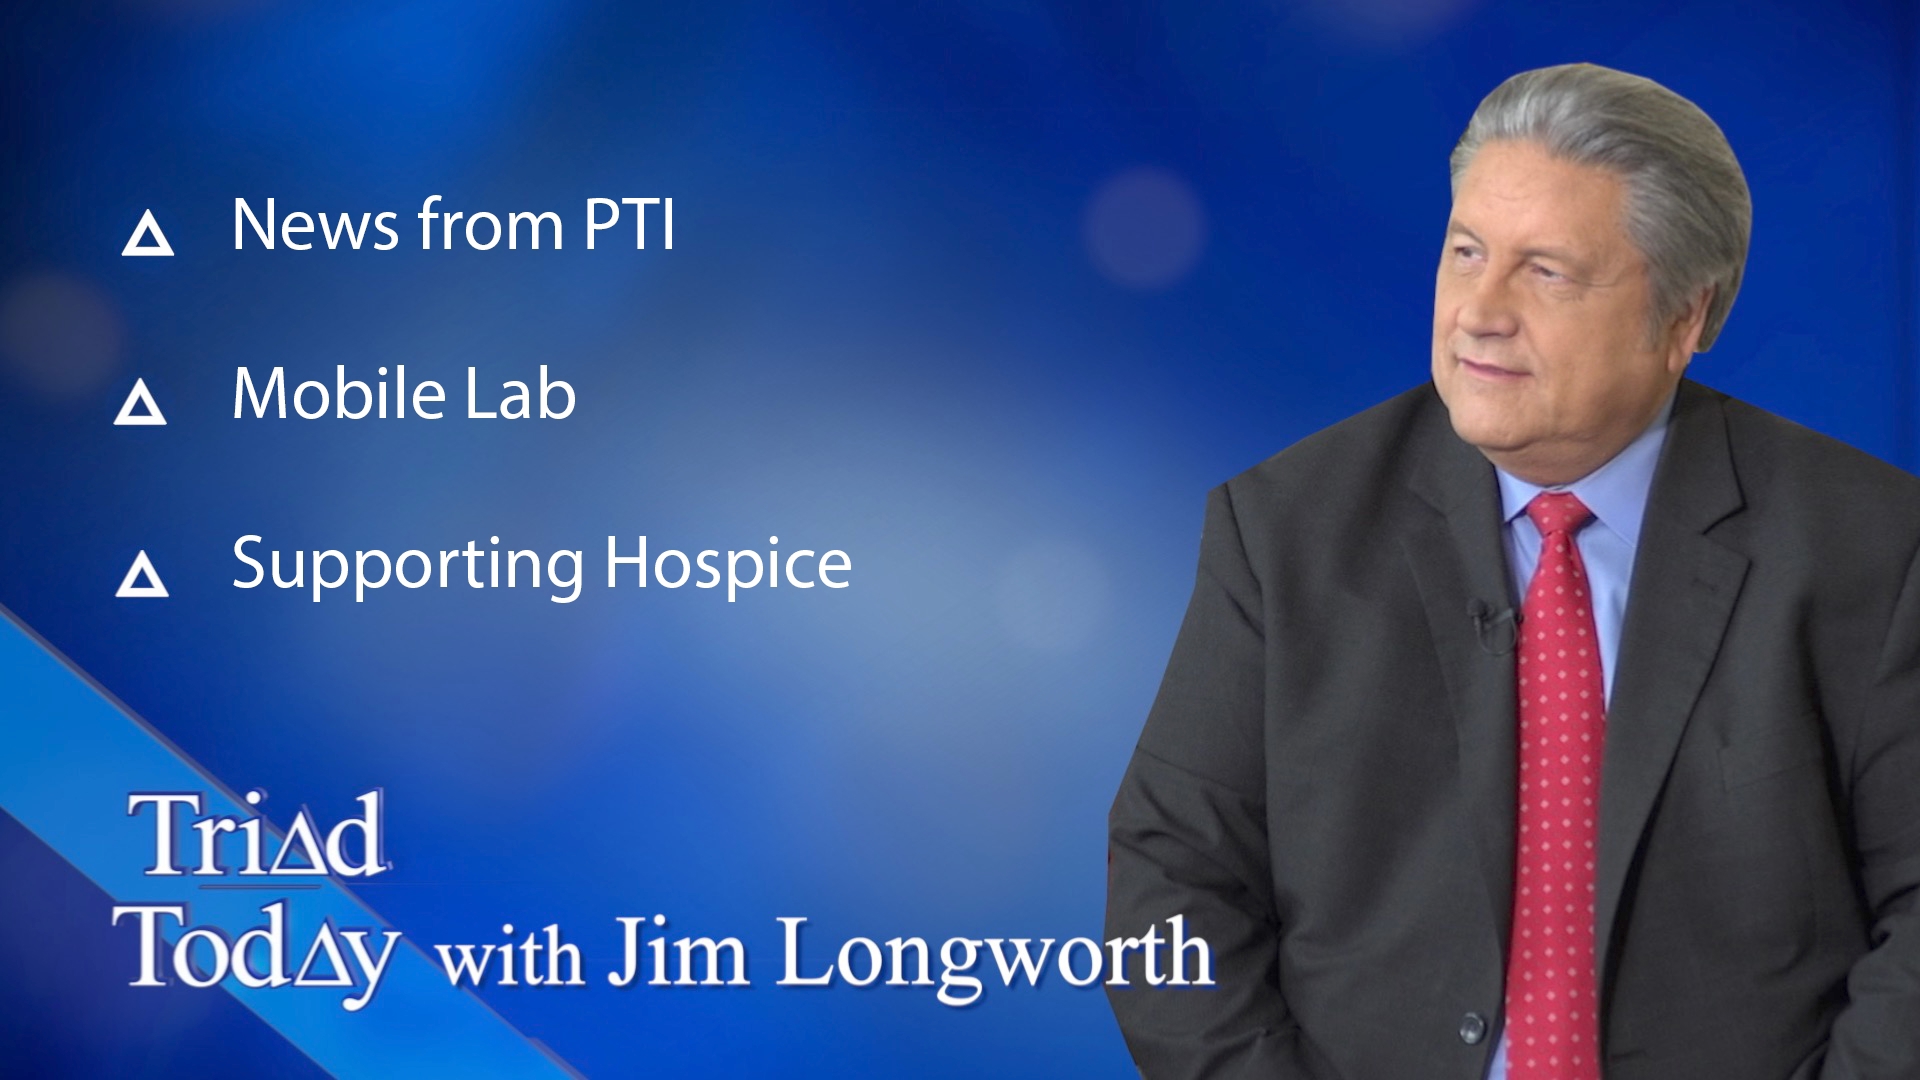 Jim Longworth and guests discuss updates from PTI Airport, a mobile lab, and supporting hospice.